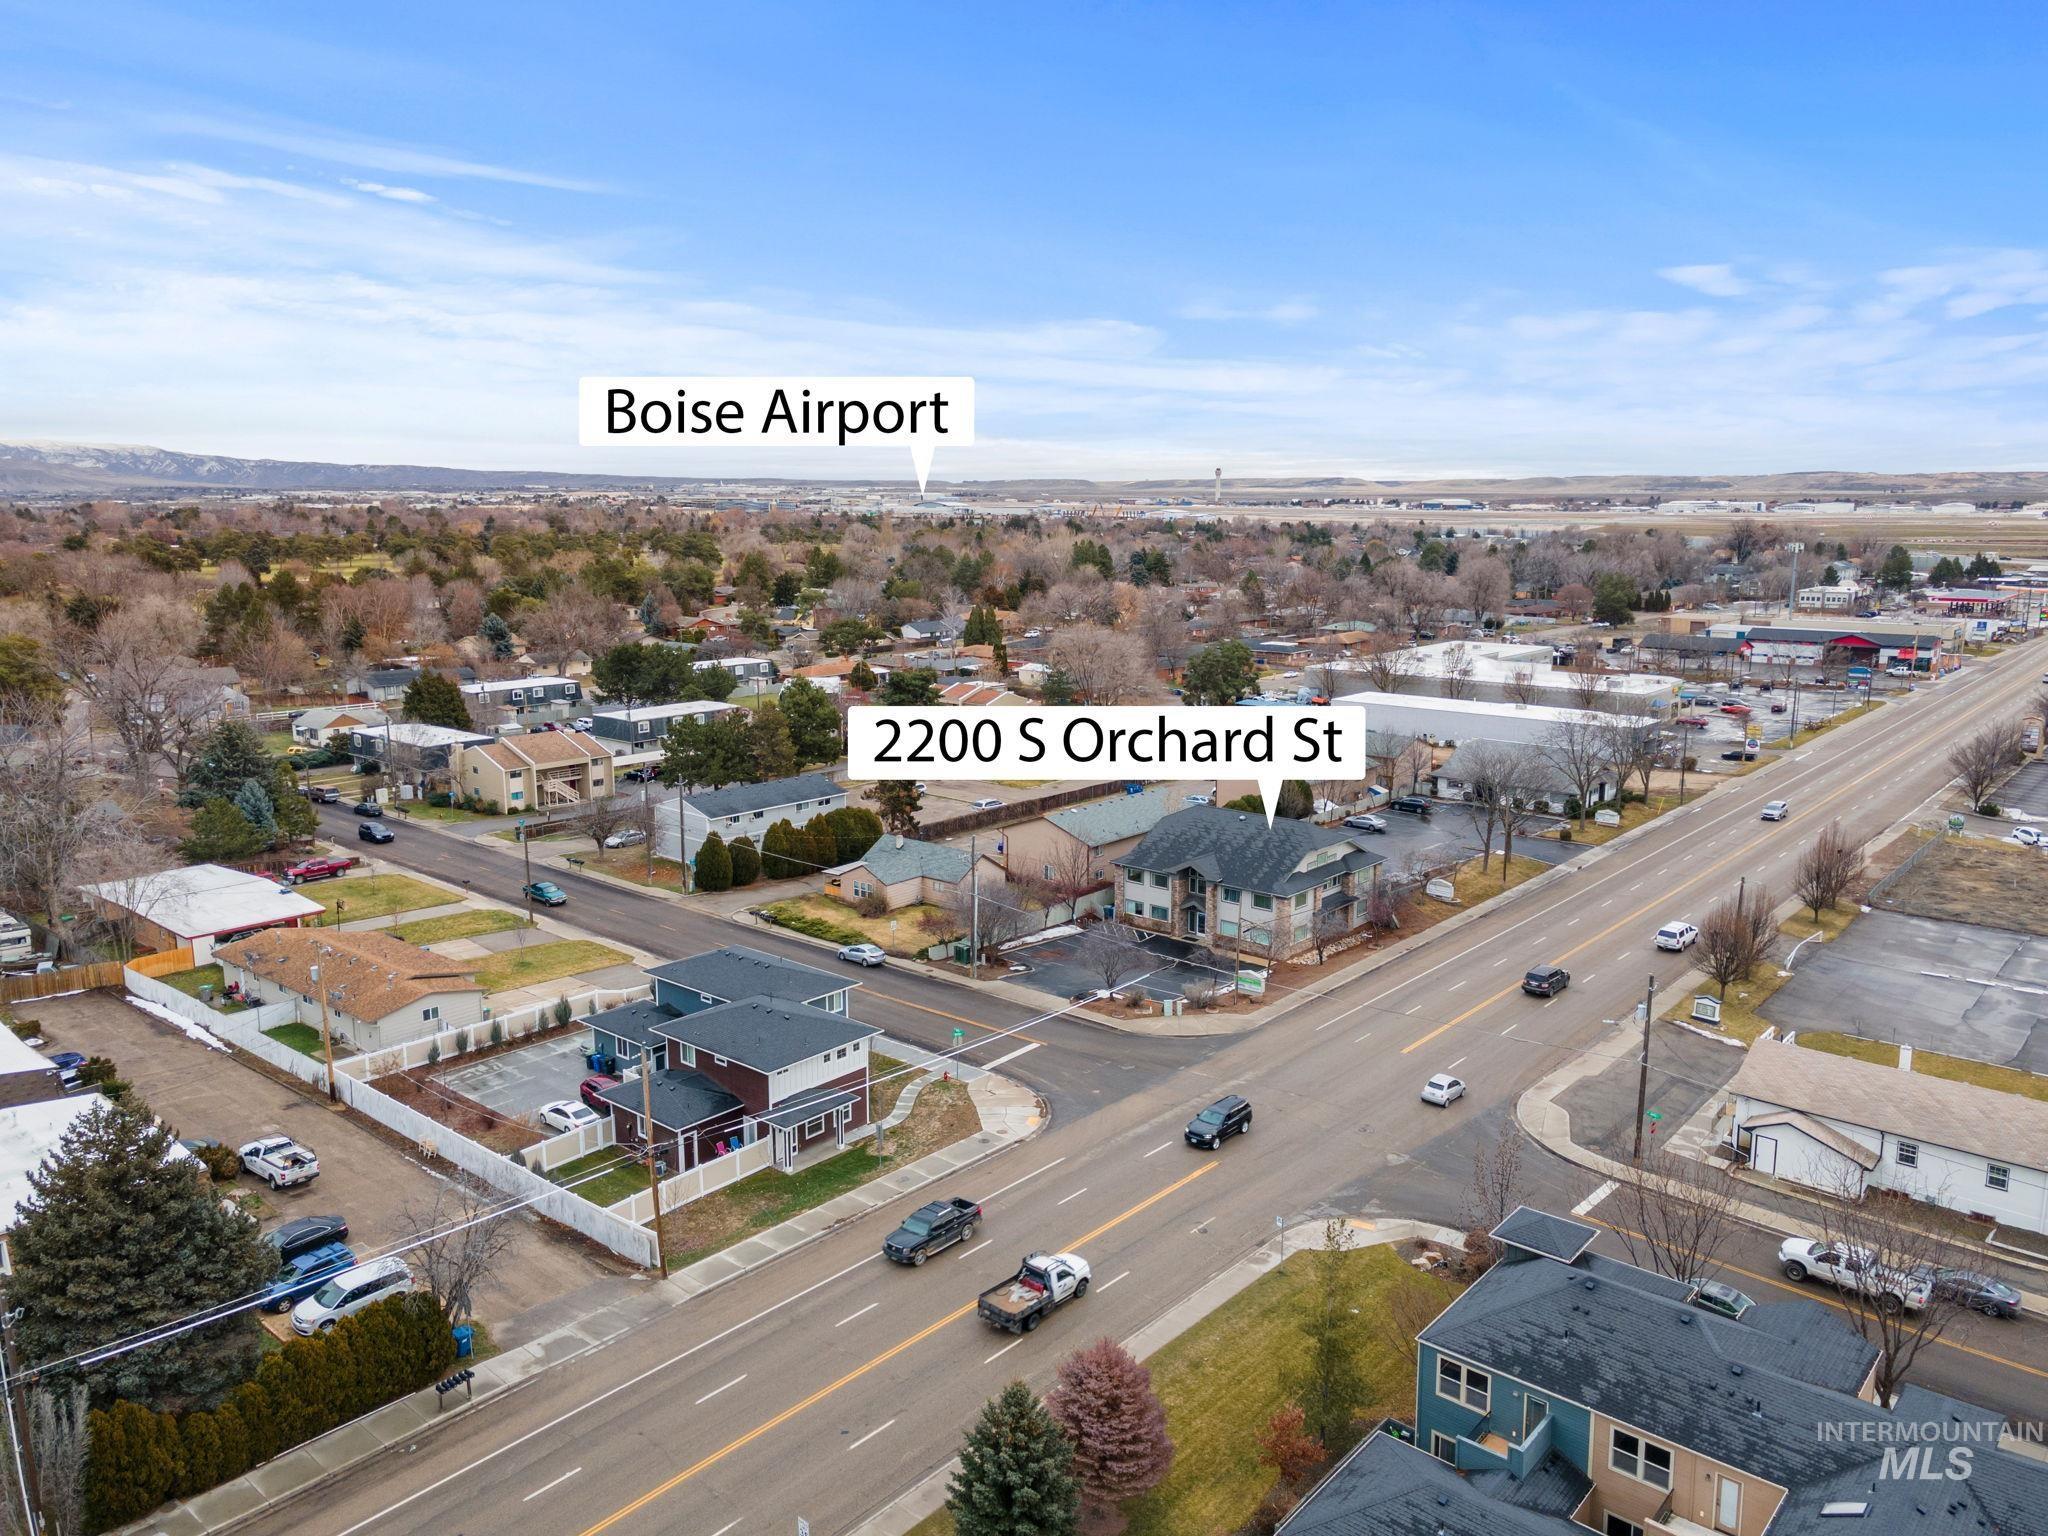 2200 S Orchard St, Boise, Idaho 83705, Business/Commercial For Sale, Price $1,300,000,MLS 98899250